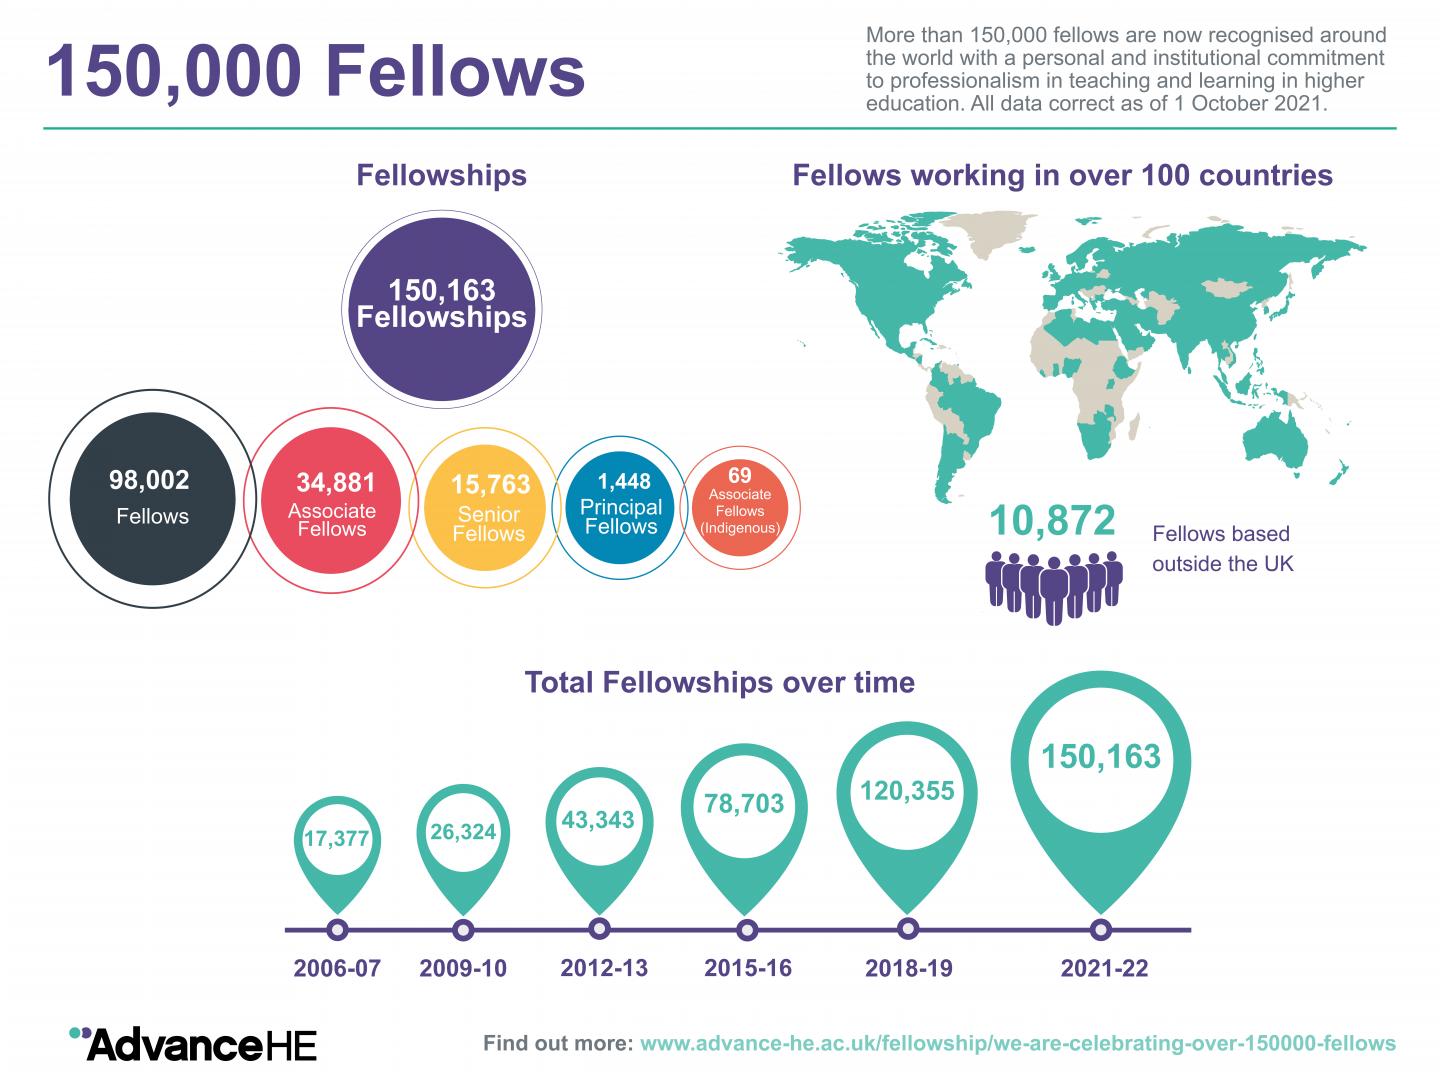 Infographic of 150,000 fellows around the world